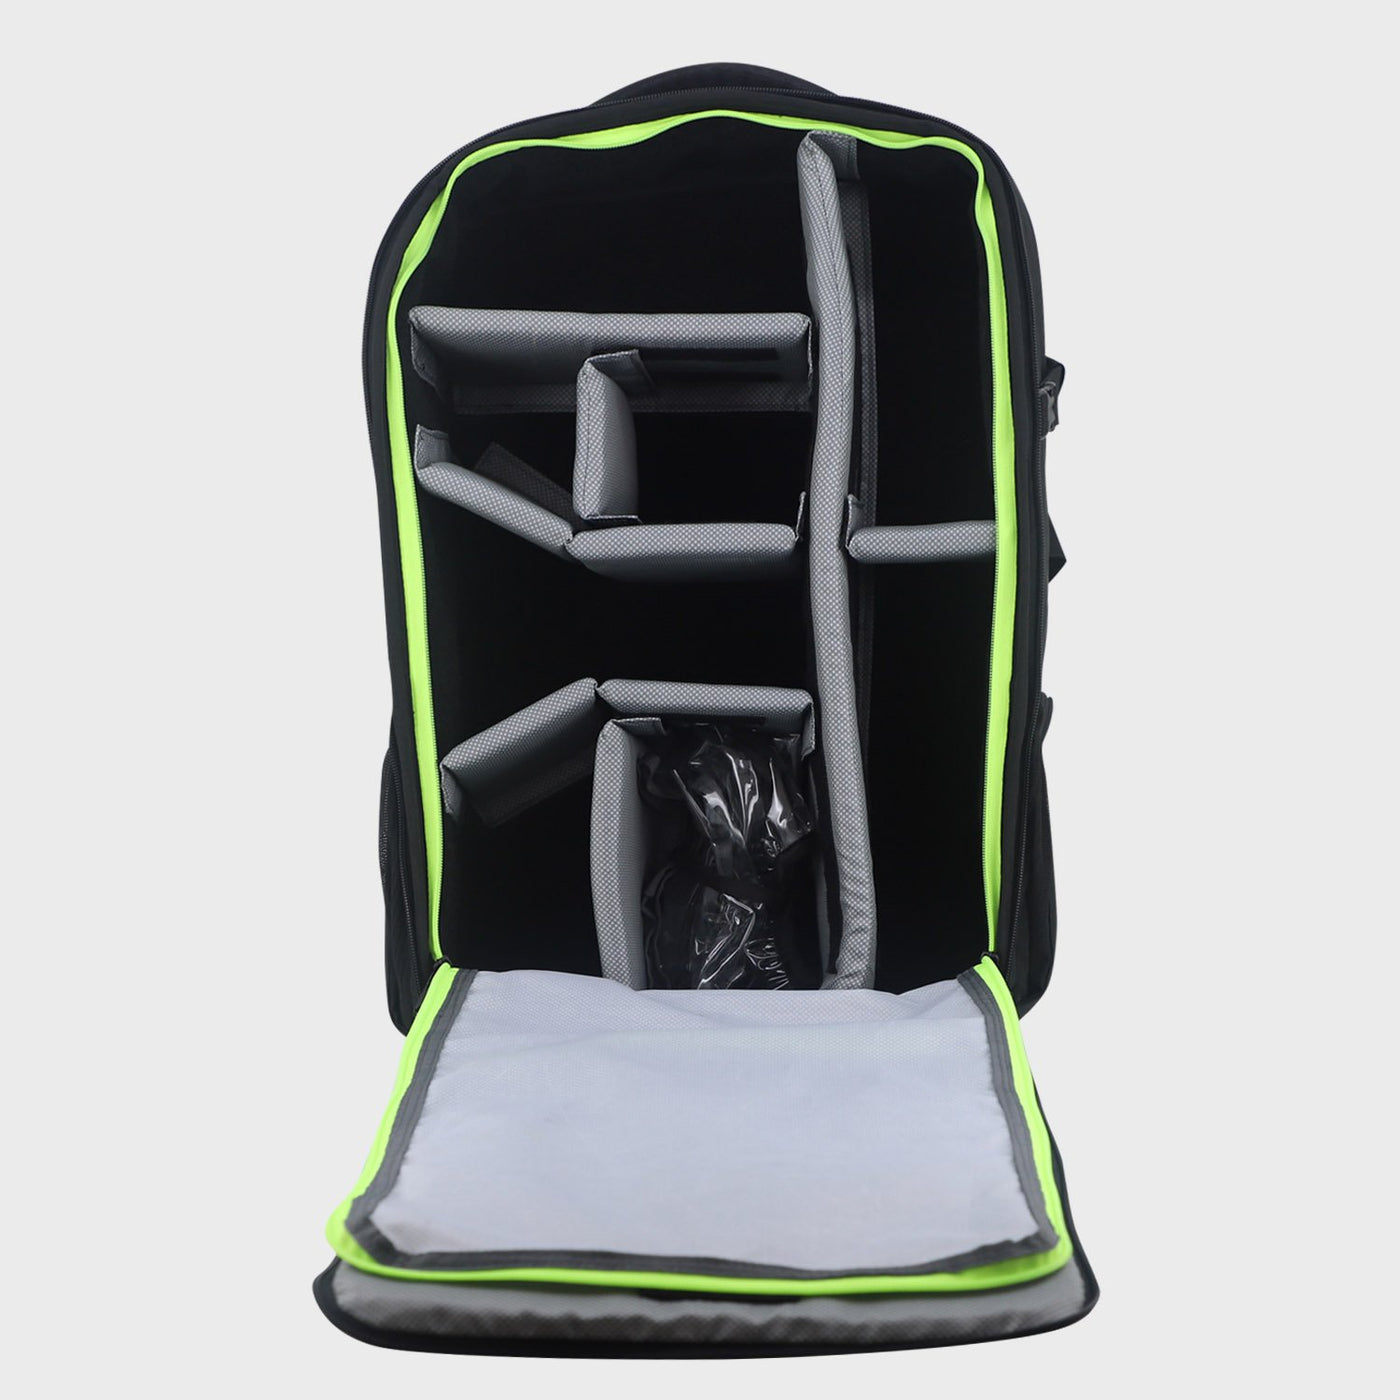 Arctic Fox Click Lime Popsicle Professional Dslr Camera Bag and Camera Backpack - open view w